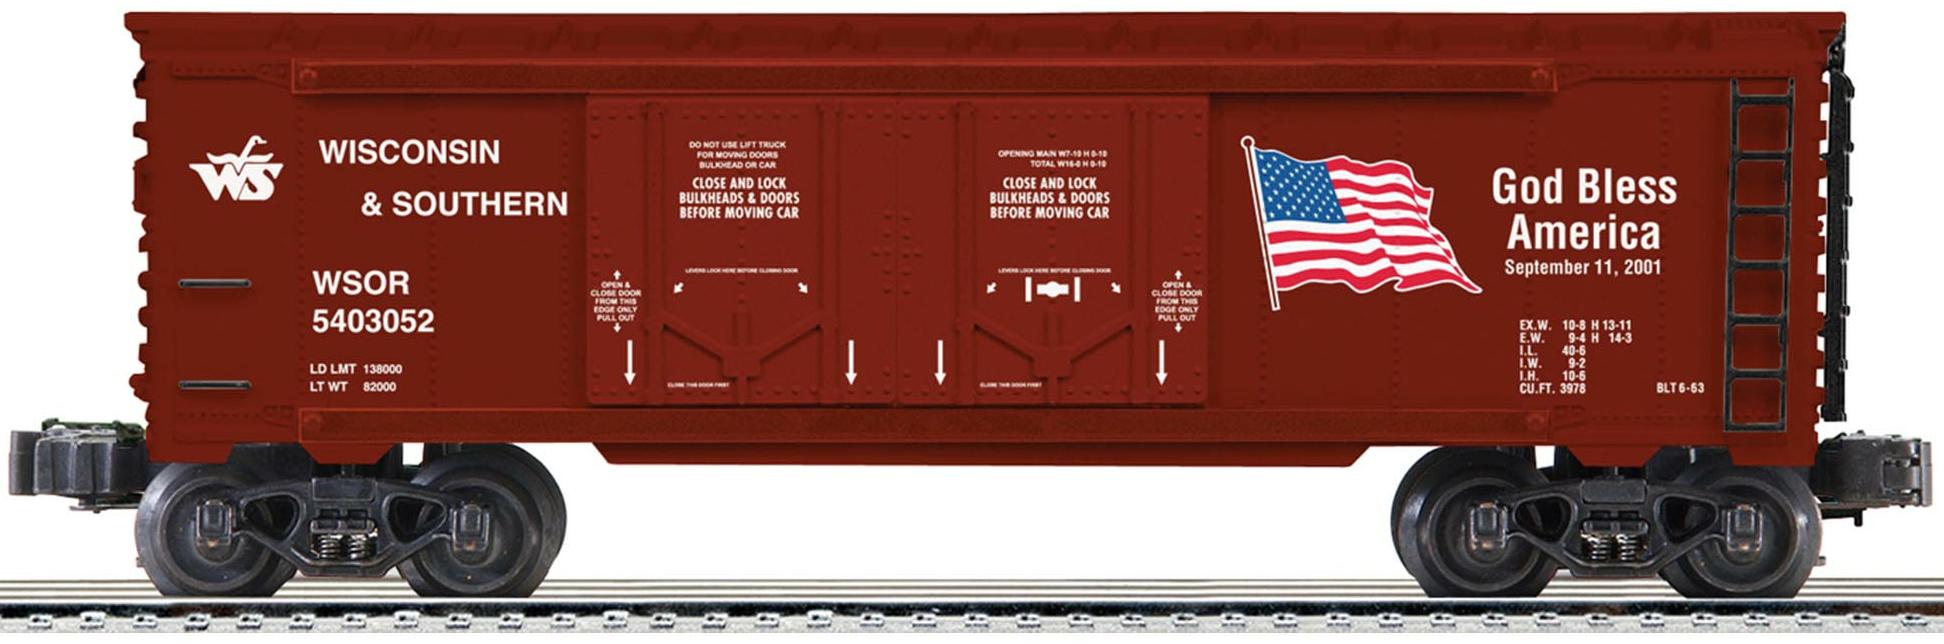 Wisconsin & Southern God Bless America Double Door Boxcar image